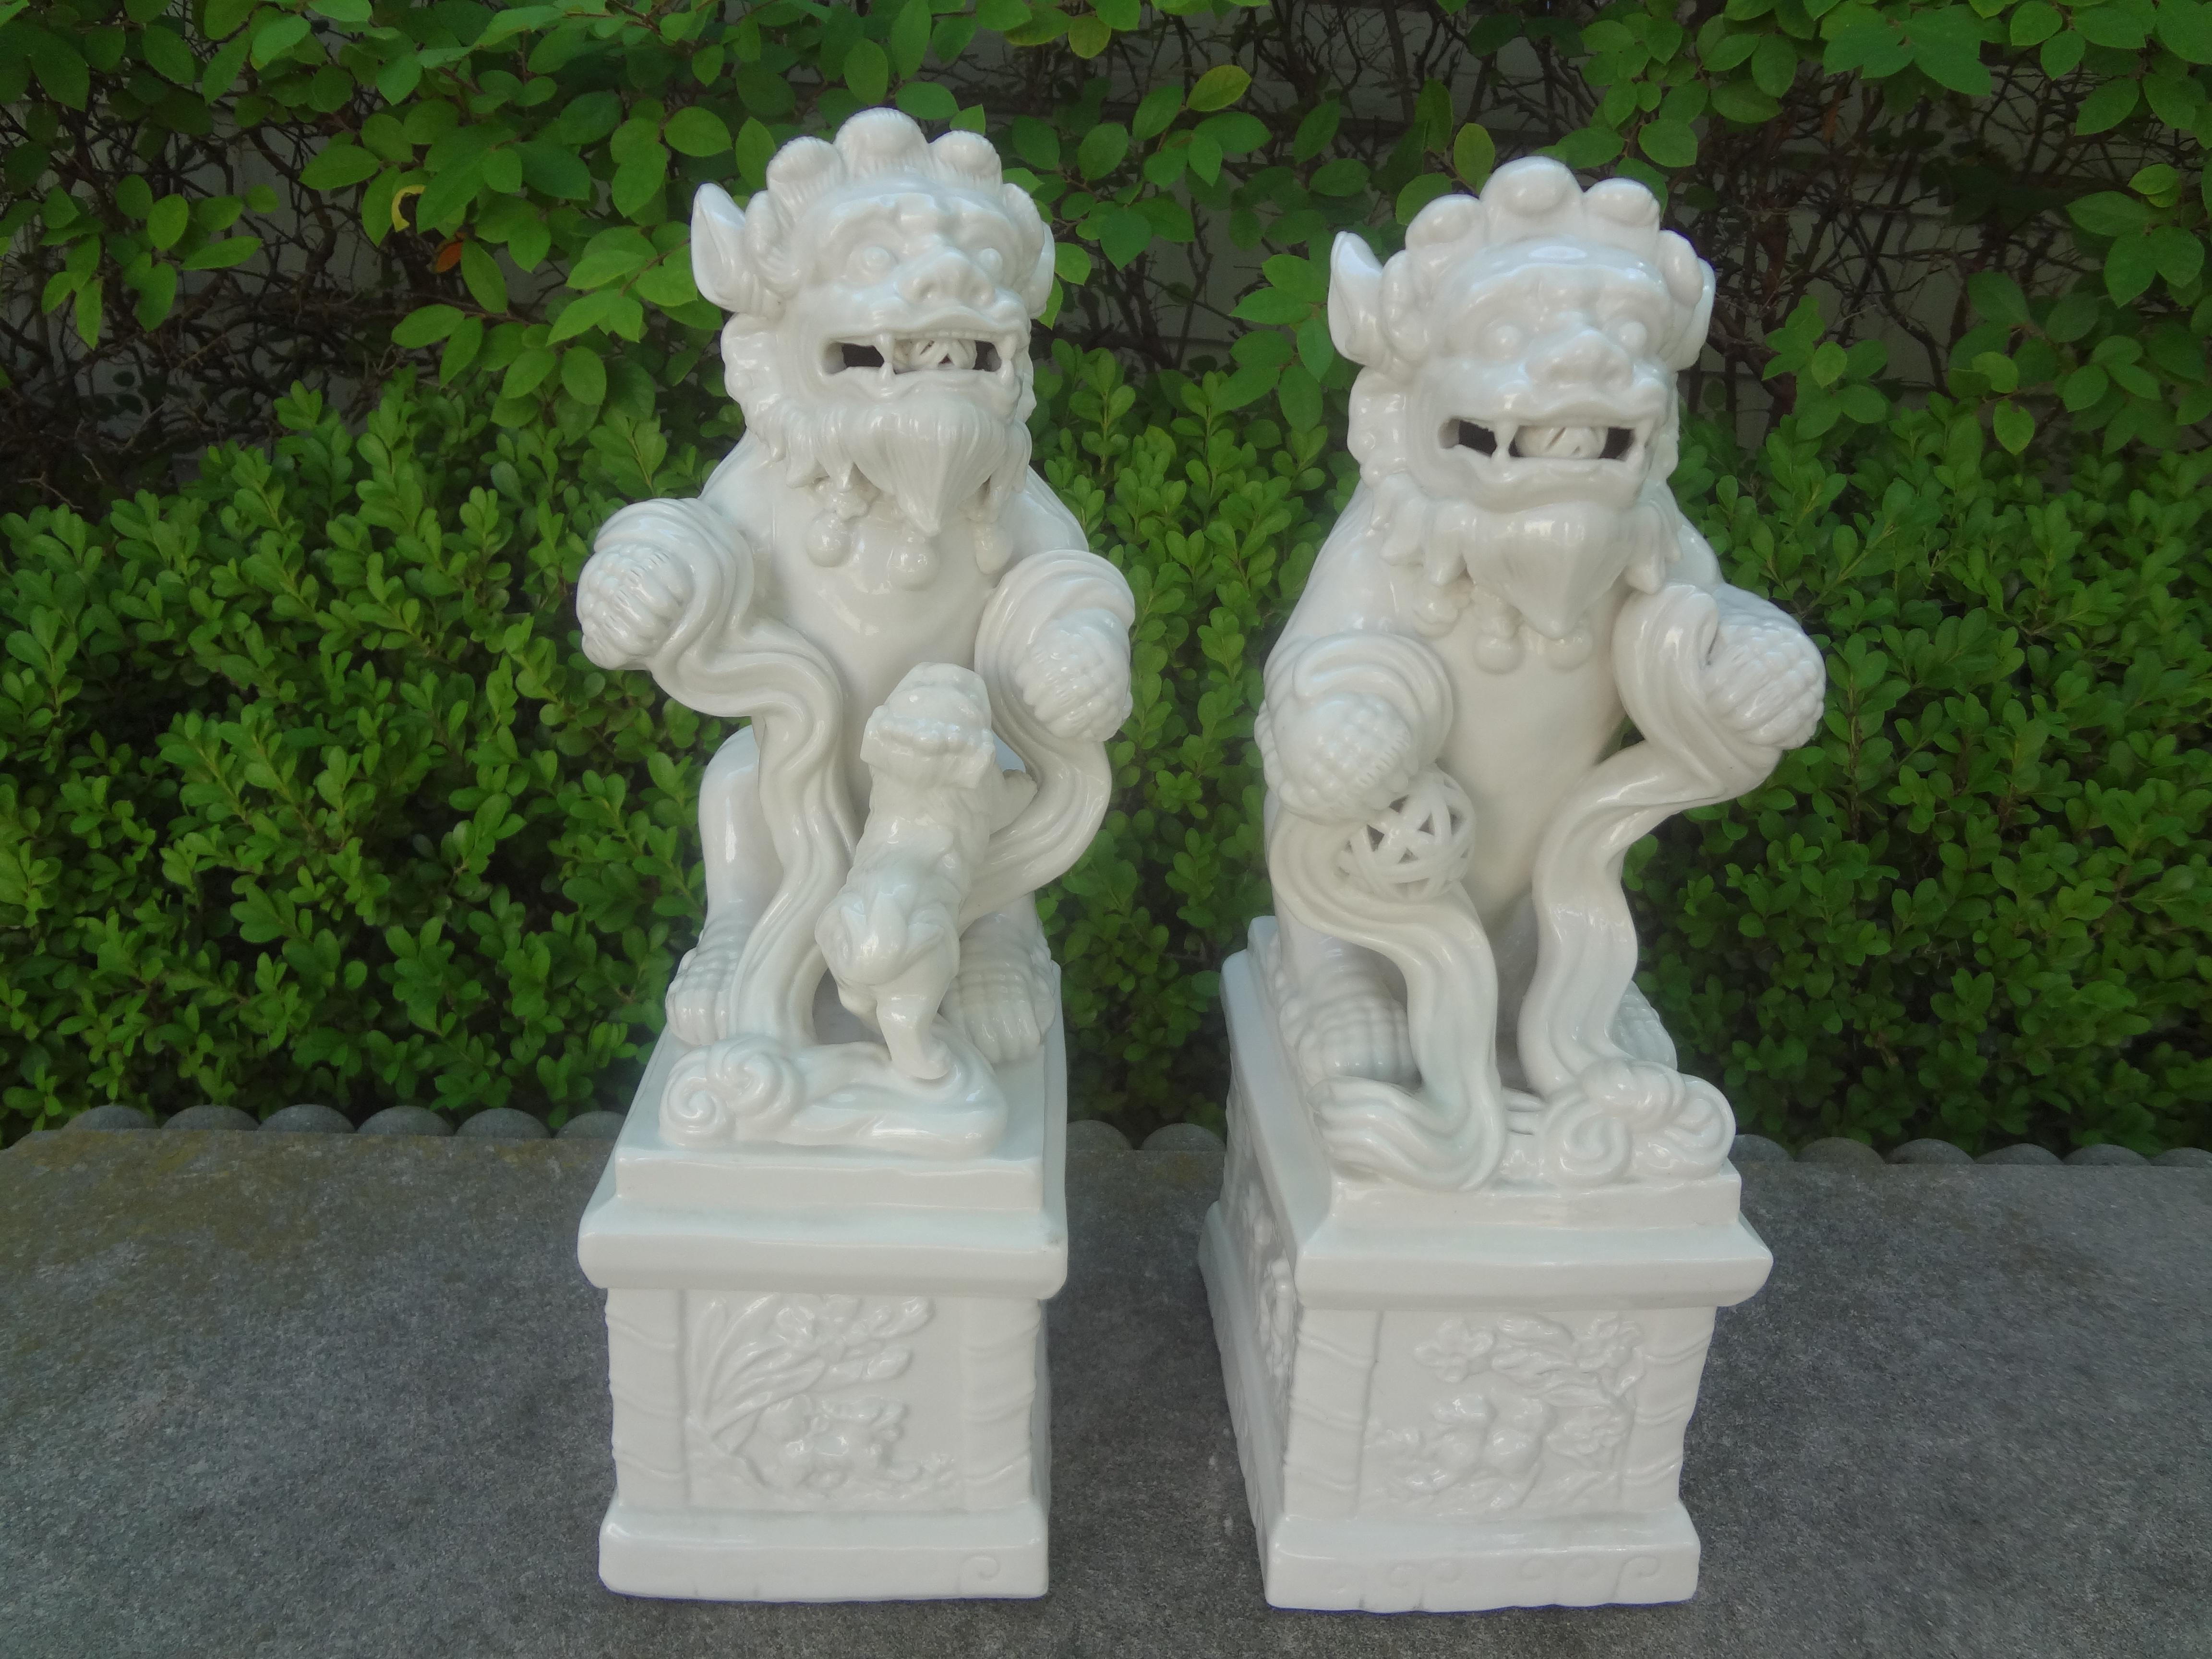 Pair of Chinese Blanc De Chine Foo dogs. This beautifully detailed pair of mid-20th century glazed ceramic foo dogs or foo lions are a male and female. The male figure being slightly larger than the female.
Dimensions:
Male:
14 inches H
5.25